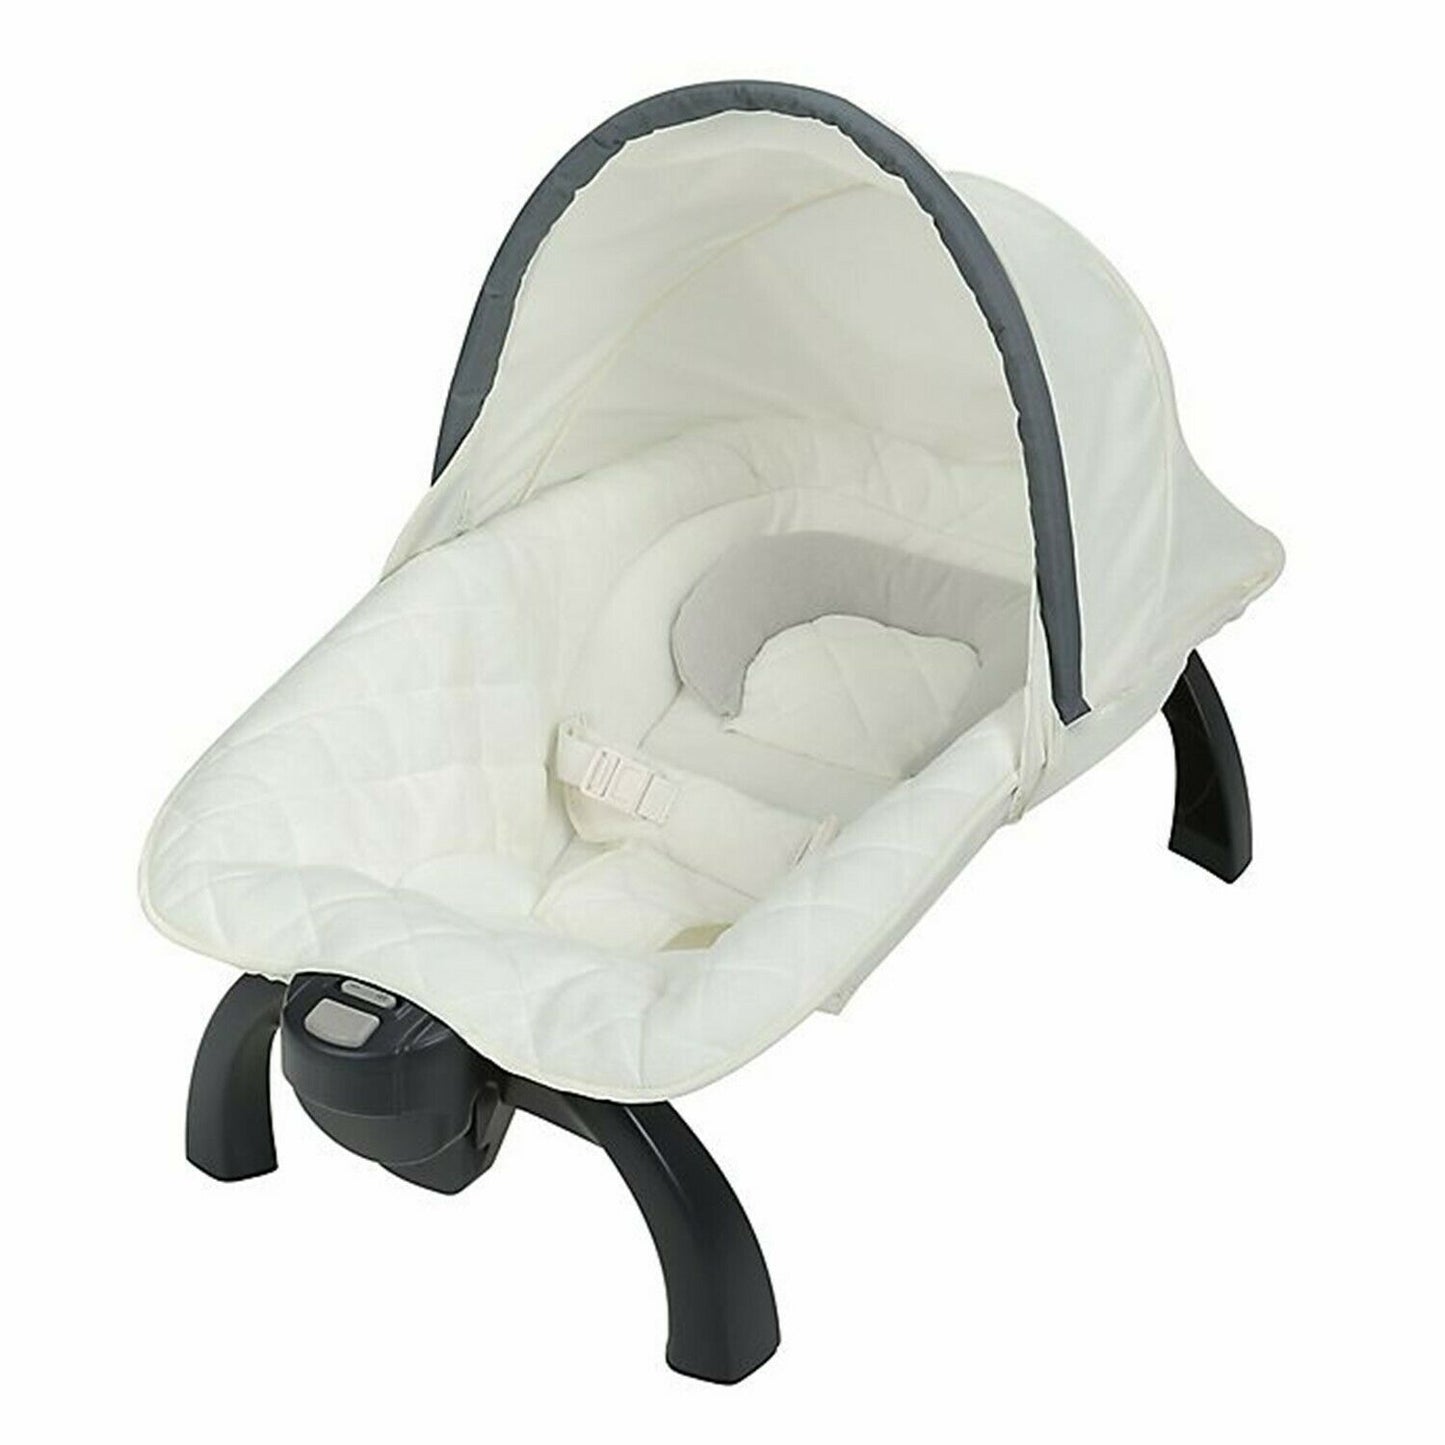 Baby Stroller with Car Seat Travel System Jogging Combo Playard High Chair New